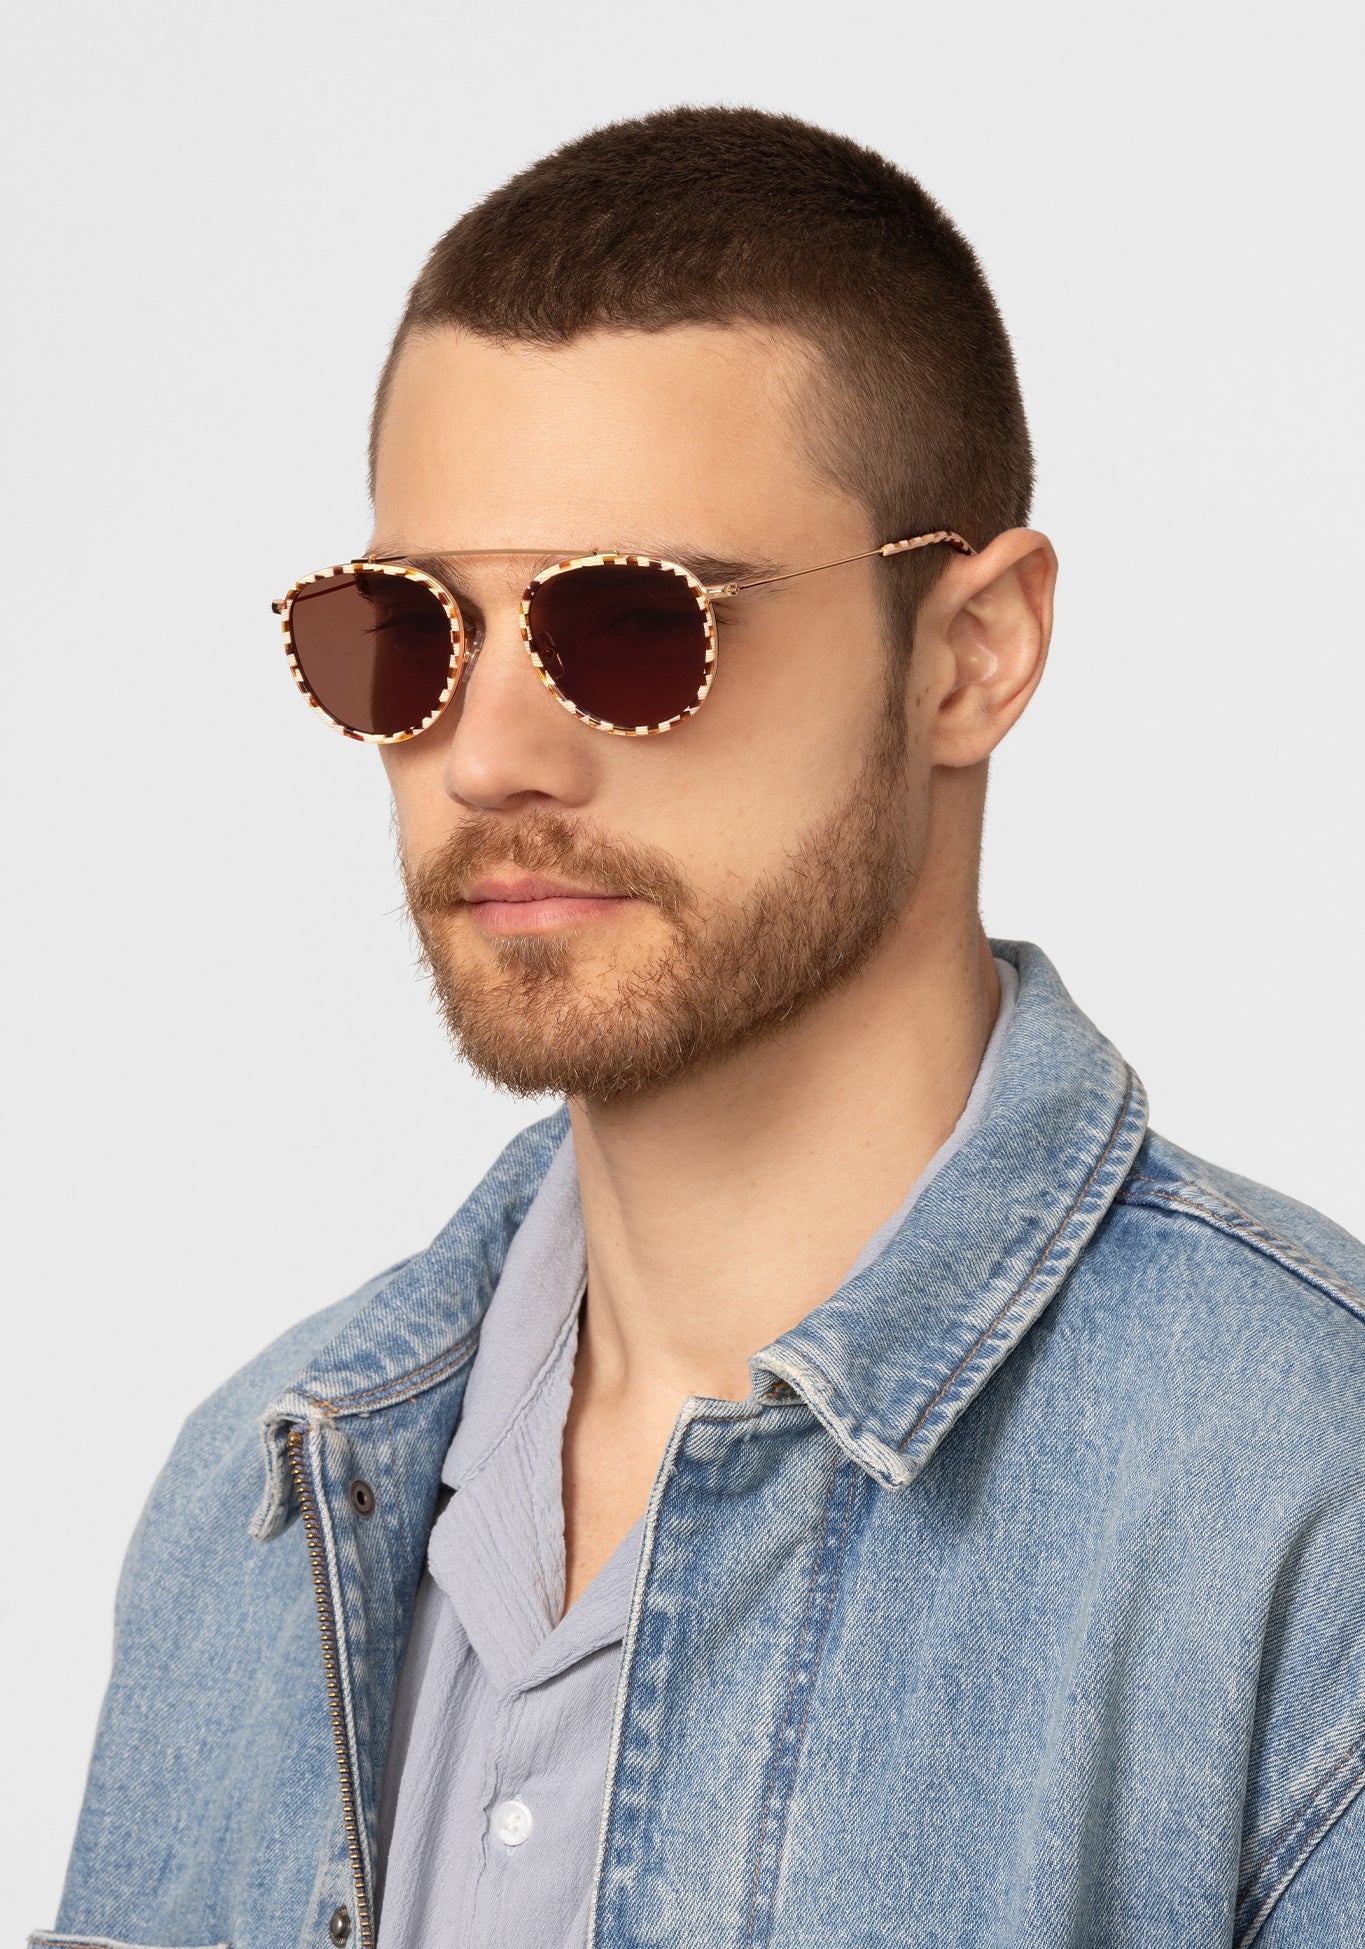 KREWE - Designer Single Bar Aviator Sunglasses - CHARTRES | Caffe Dolce 18K Handcrafted, luxury brown and white checkered acetate sunglasses. Similar to Oliver Peoples sunglasses, moscot sunglasses mens model | Model: David